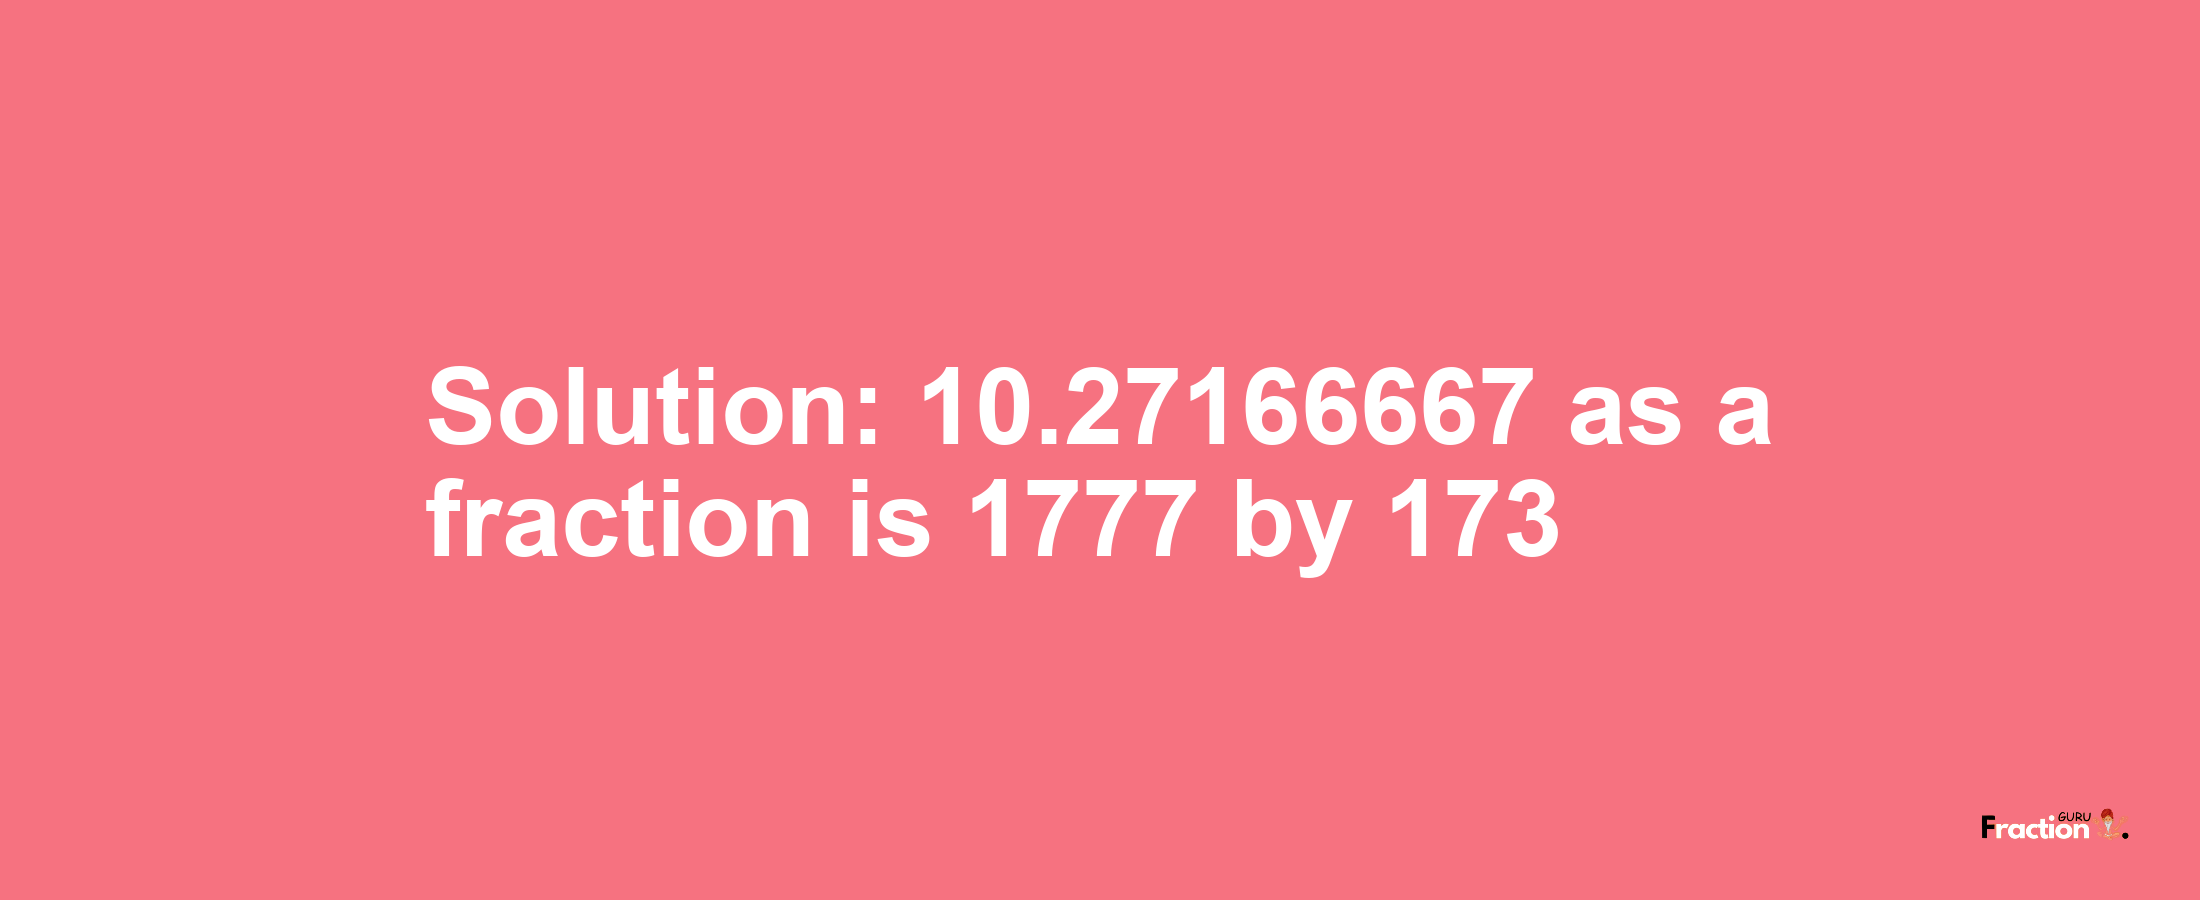 Solution:10.27166667 as a fraction is 1777/173